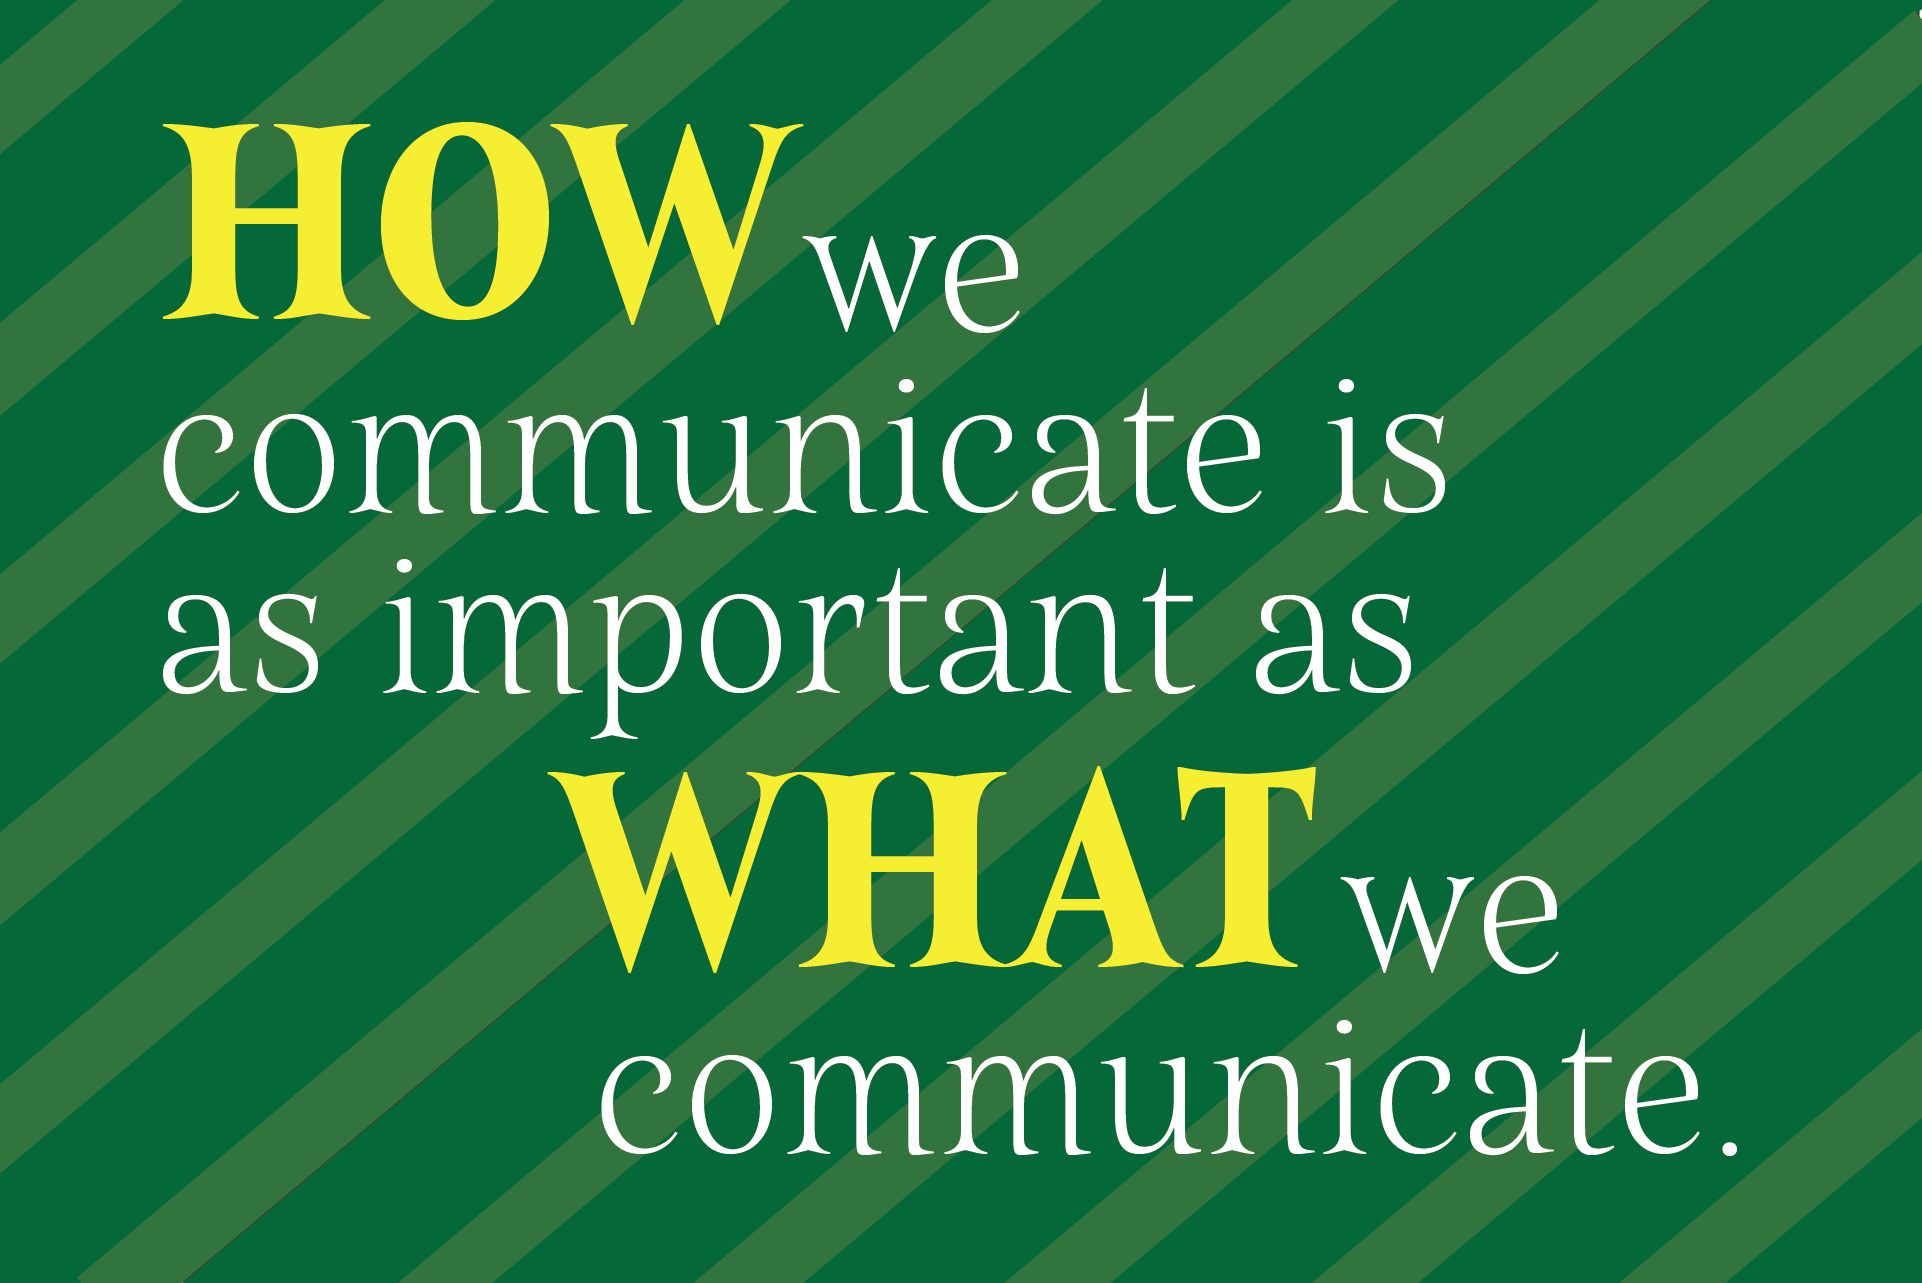 How we communicate is as important as what we communicate